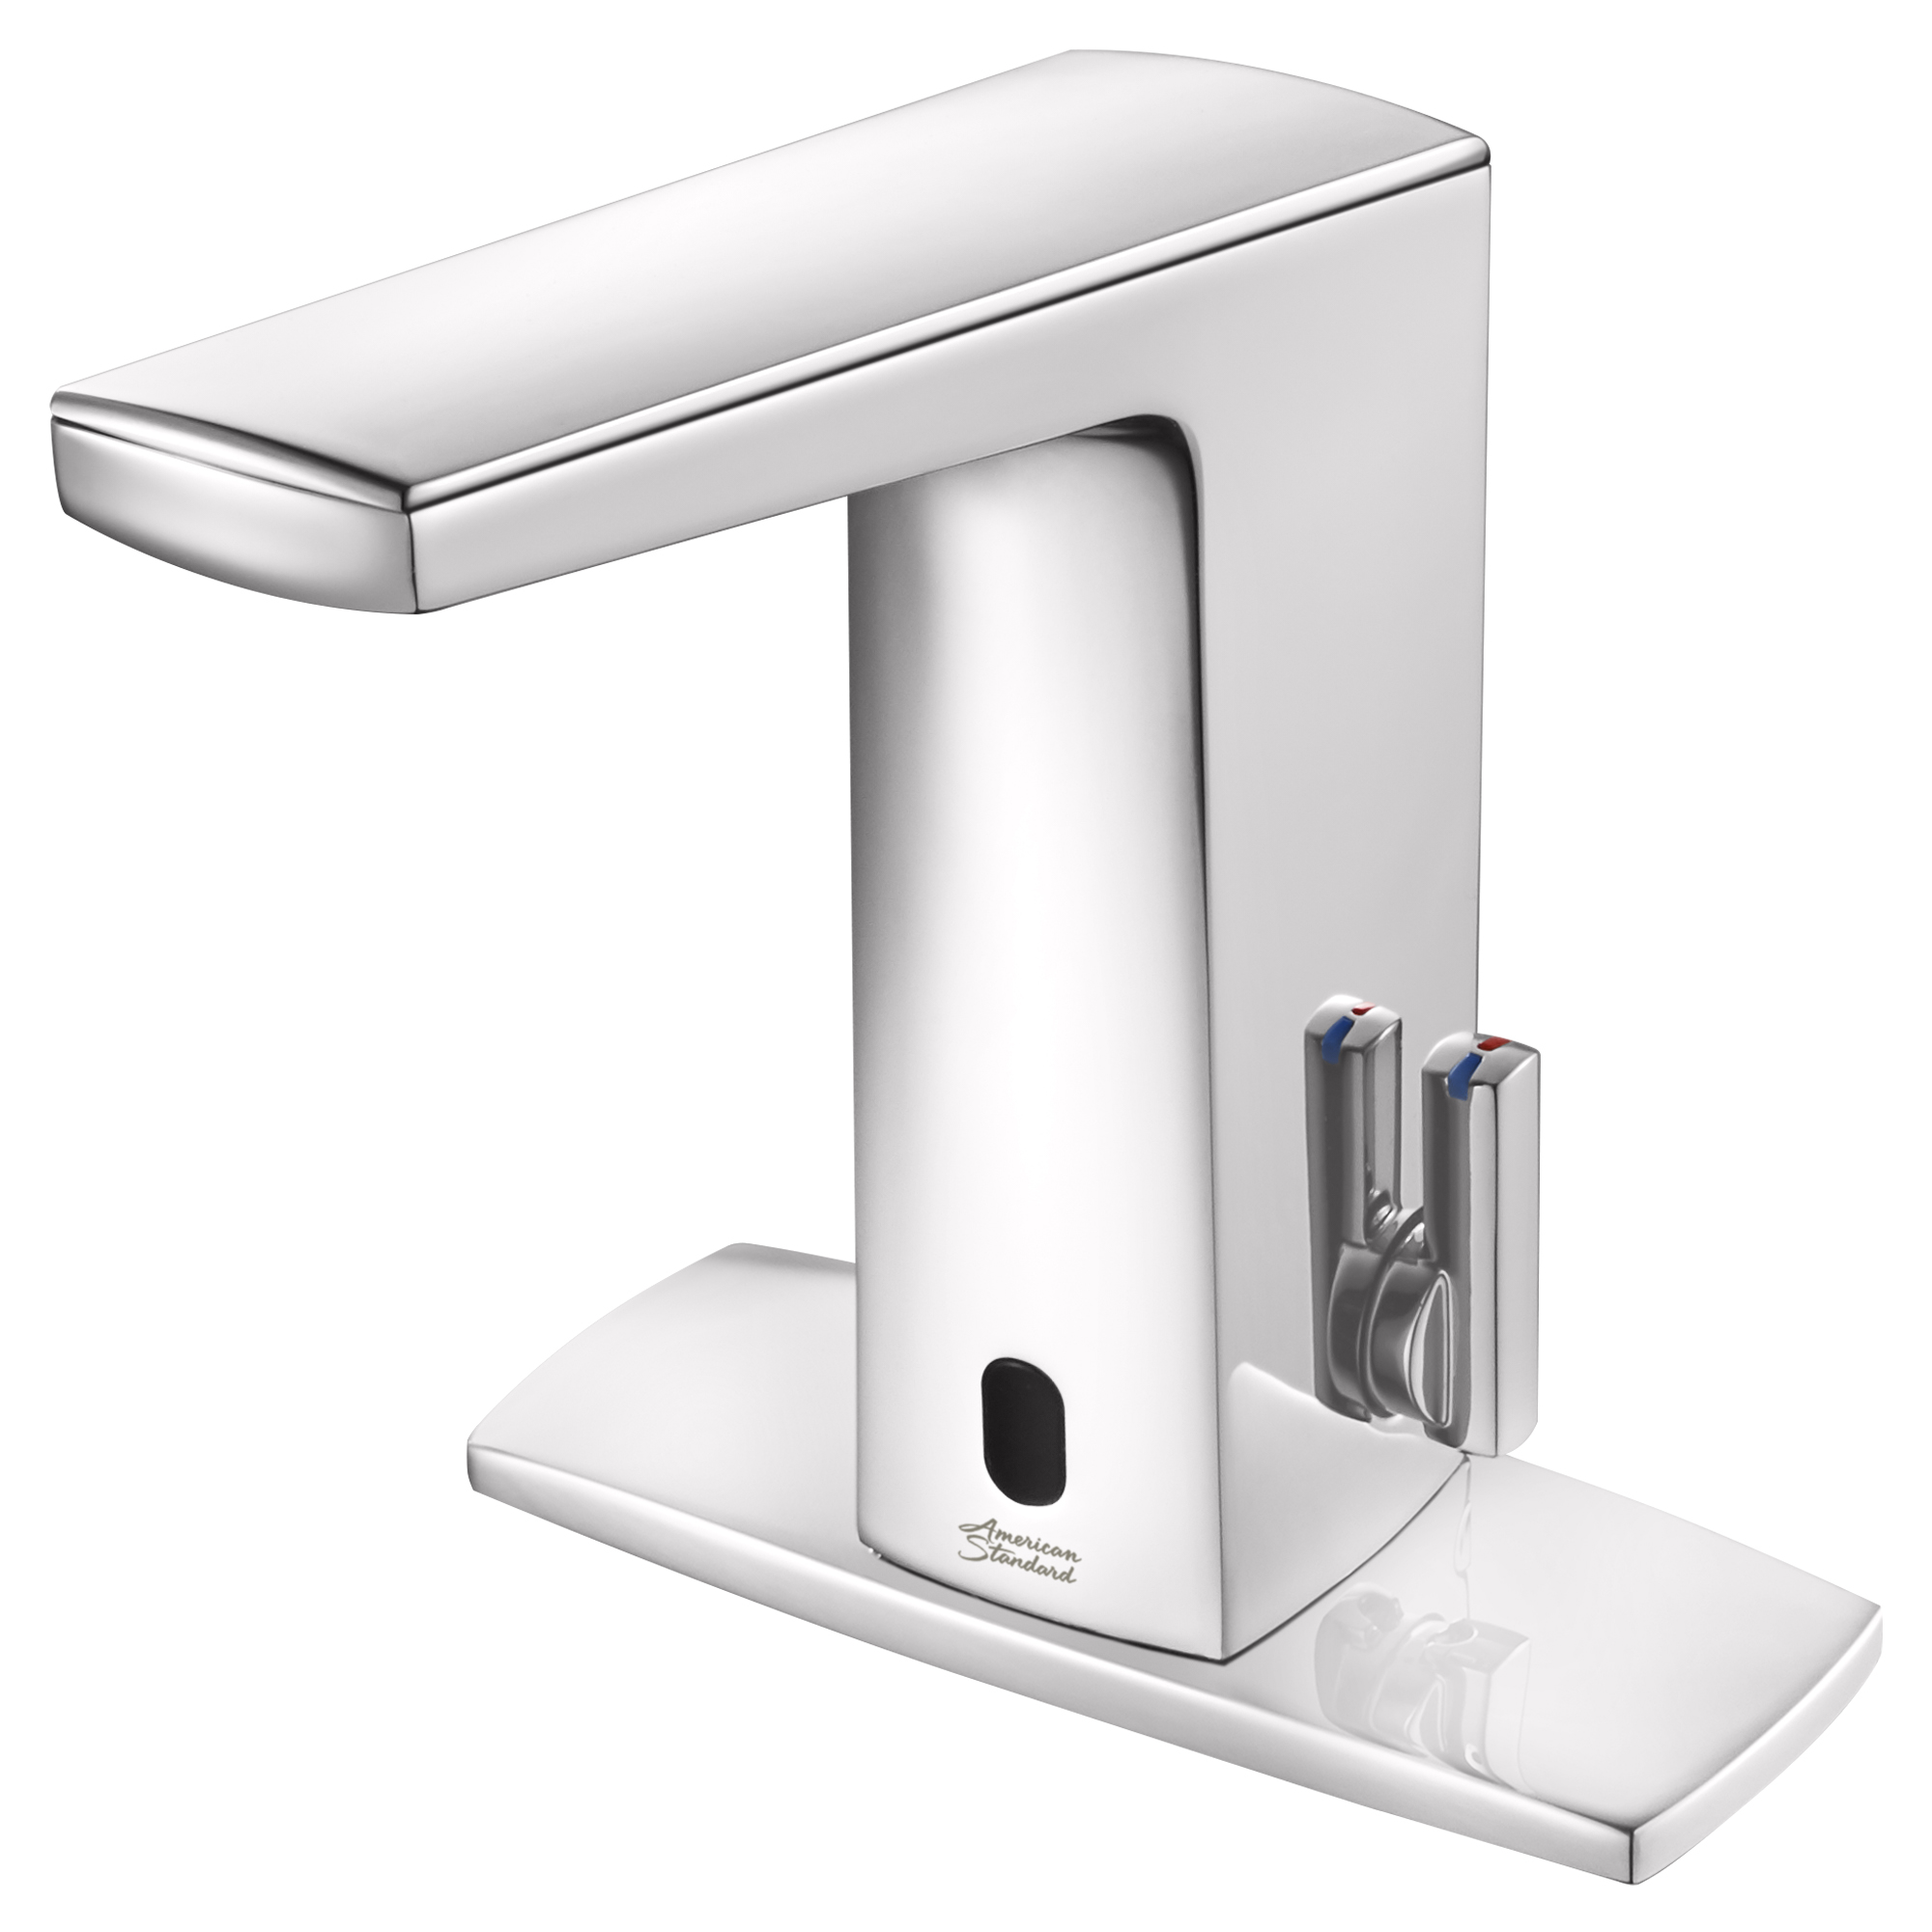 Paradigm™ Selectronic™ Touchless Faucet, Base Model With Above-Deck Mixing, 0.5 gpm/1.9 Lpm